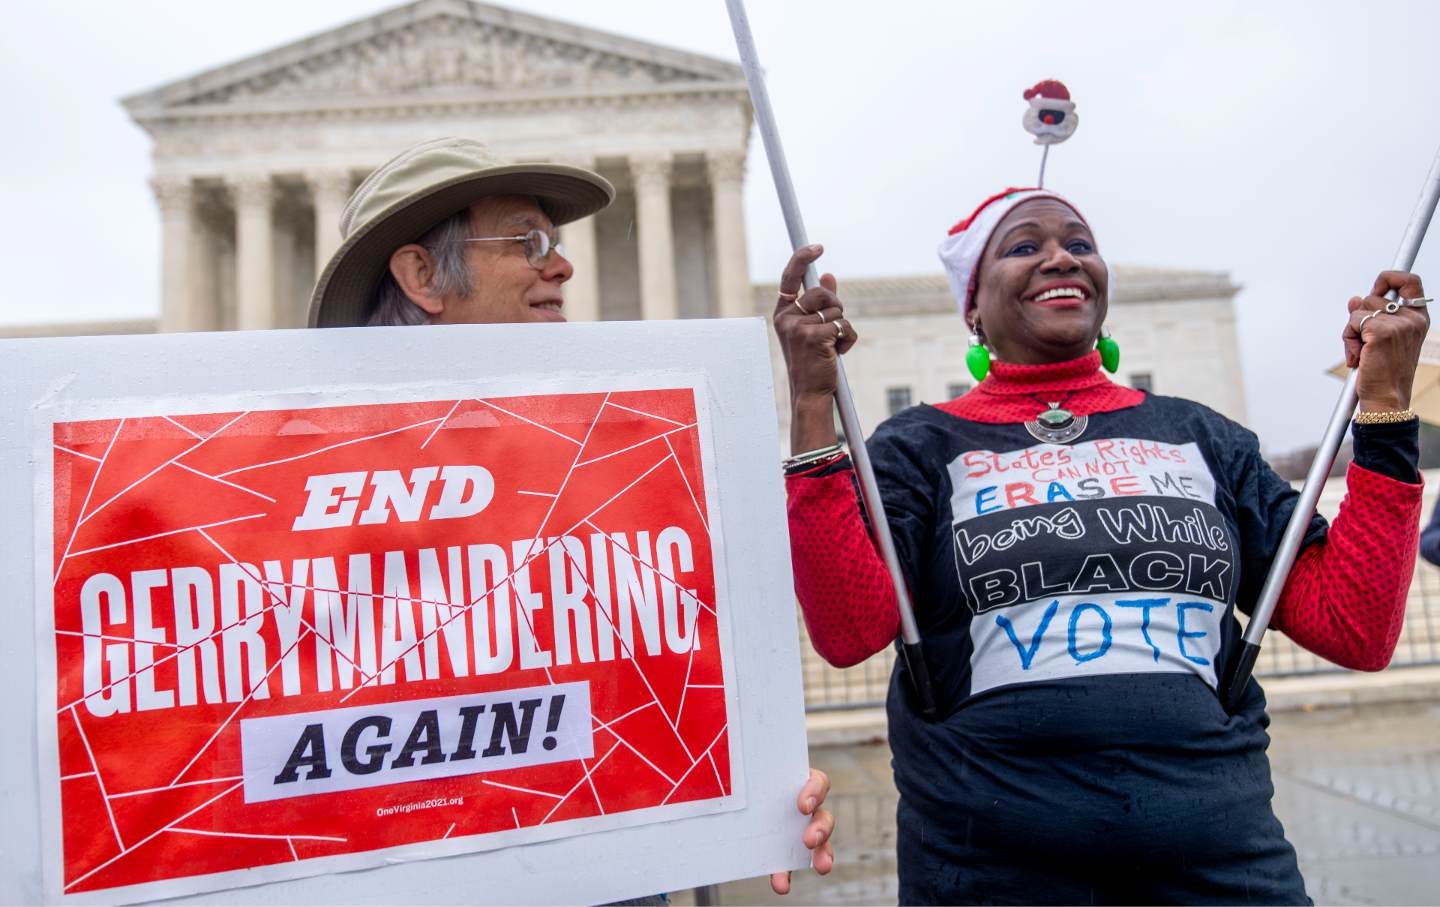 North Carolina Republicans Just Took Gerrymandering to a Whole New Level